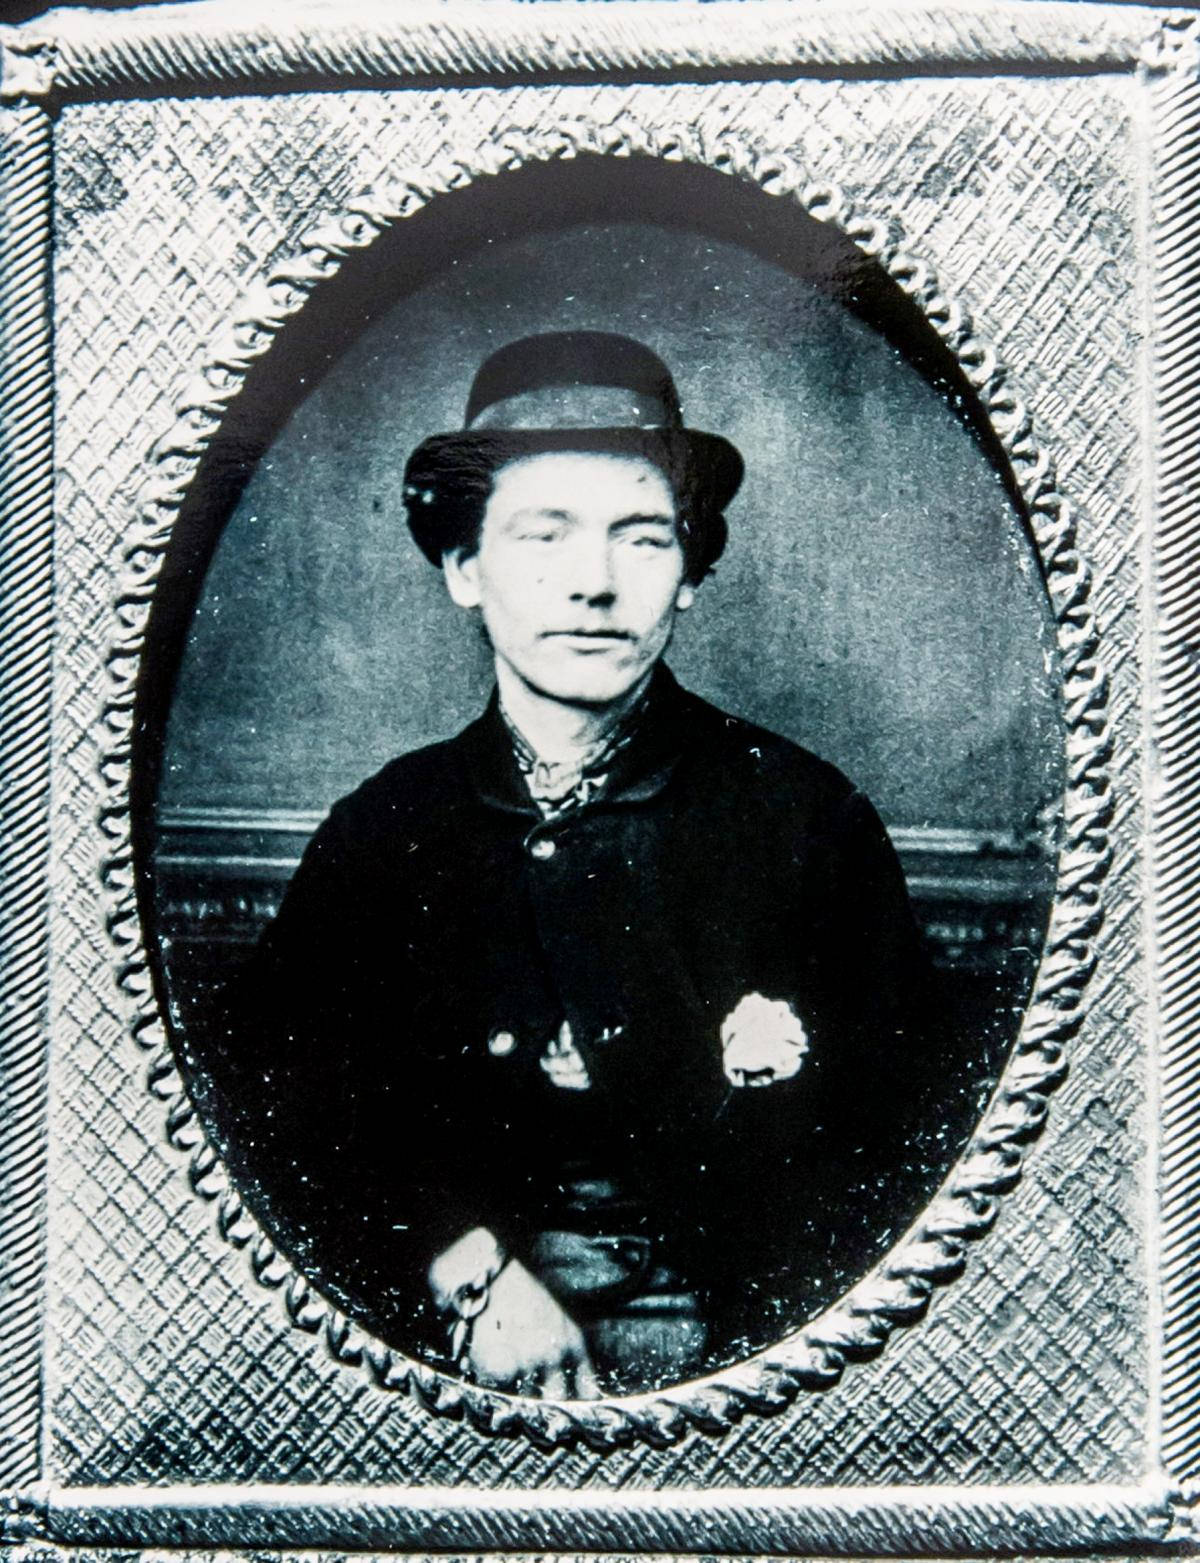 A mugshot of Samuel Crowley, charged with having skeleton keys in October 1862.